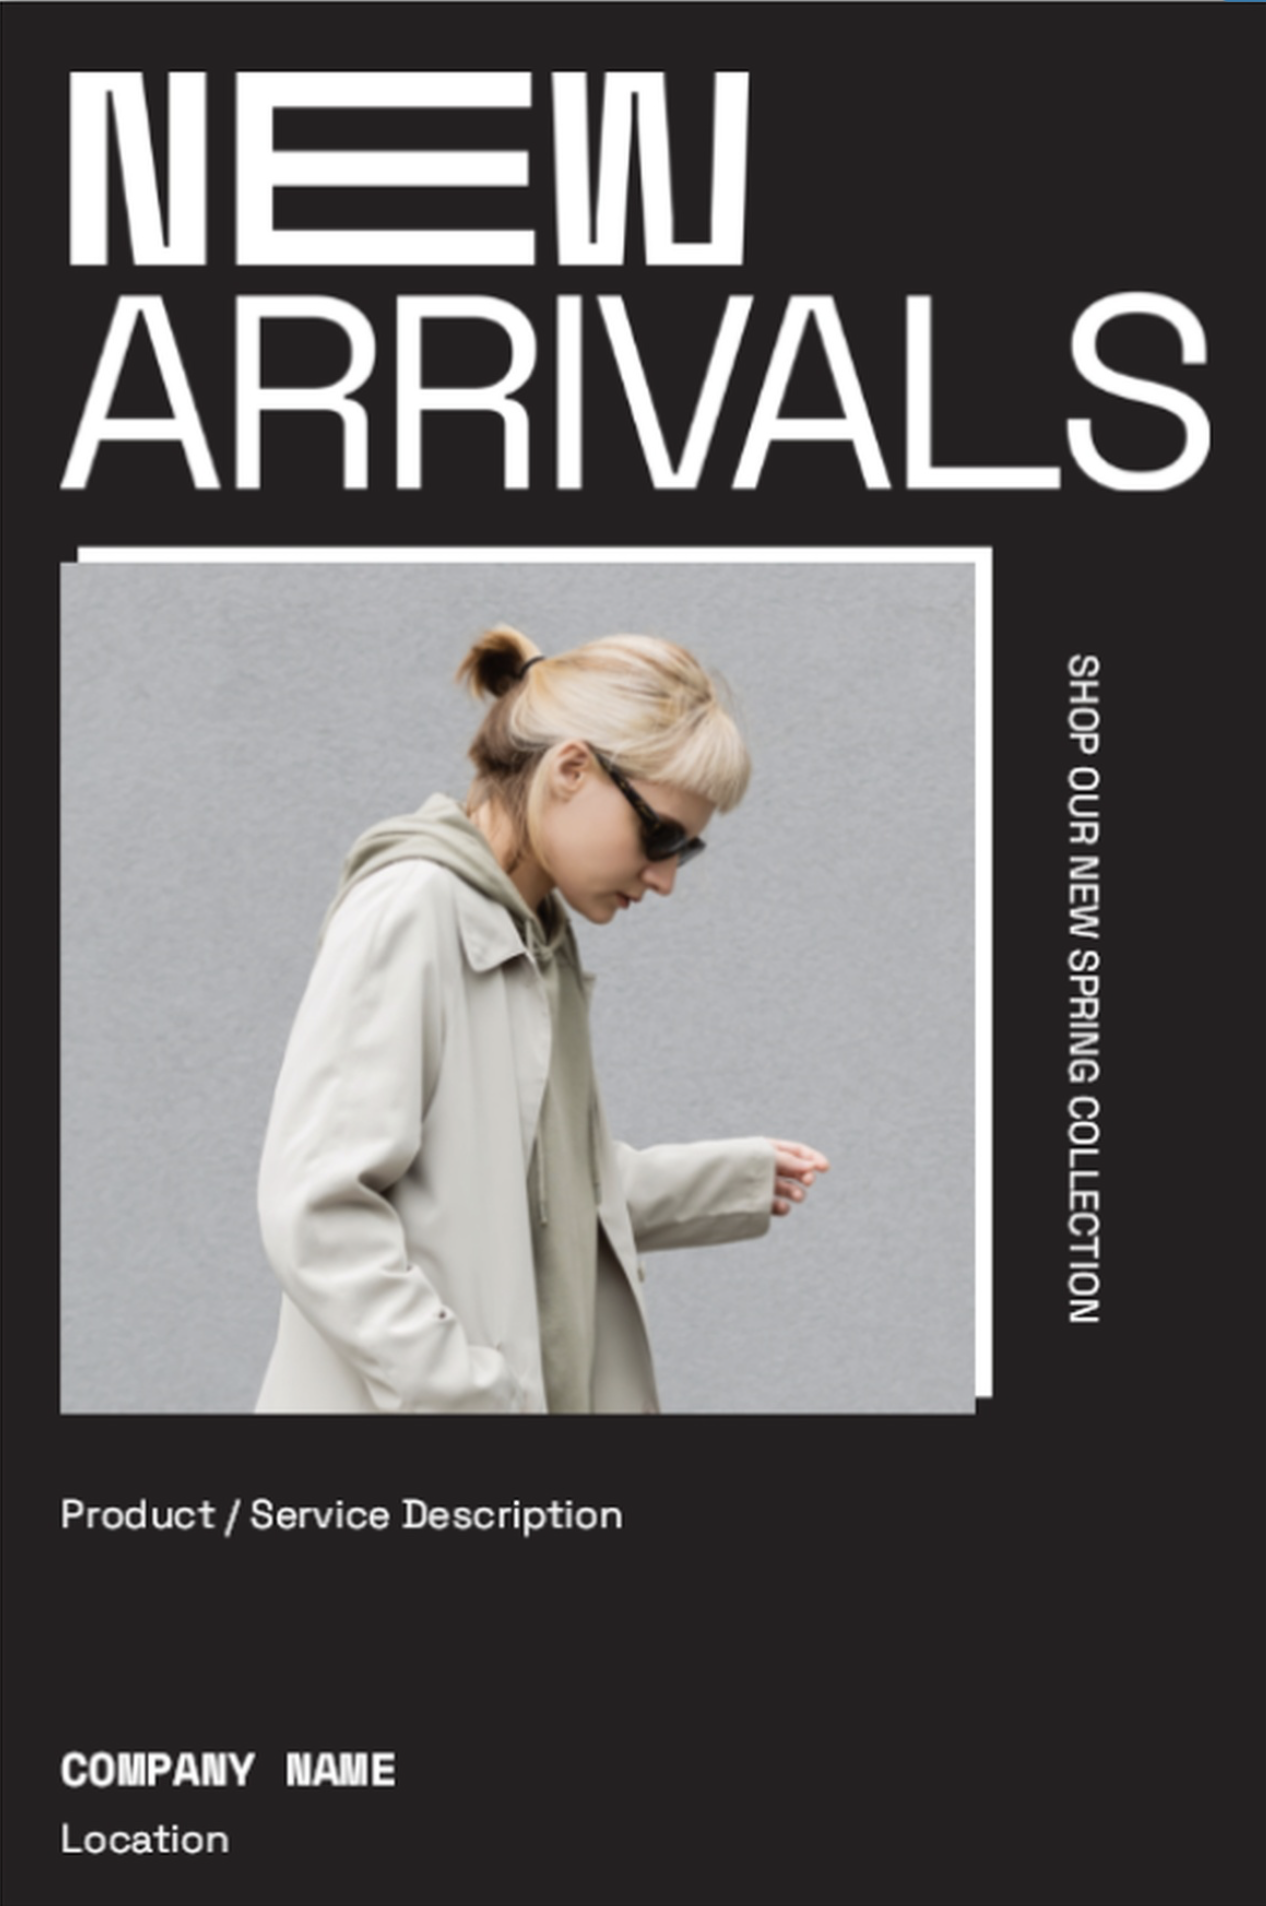 New Arrivals flyers Template